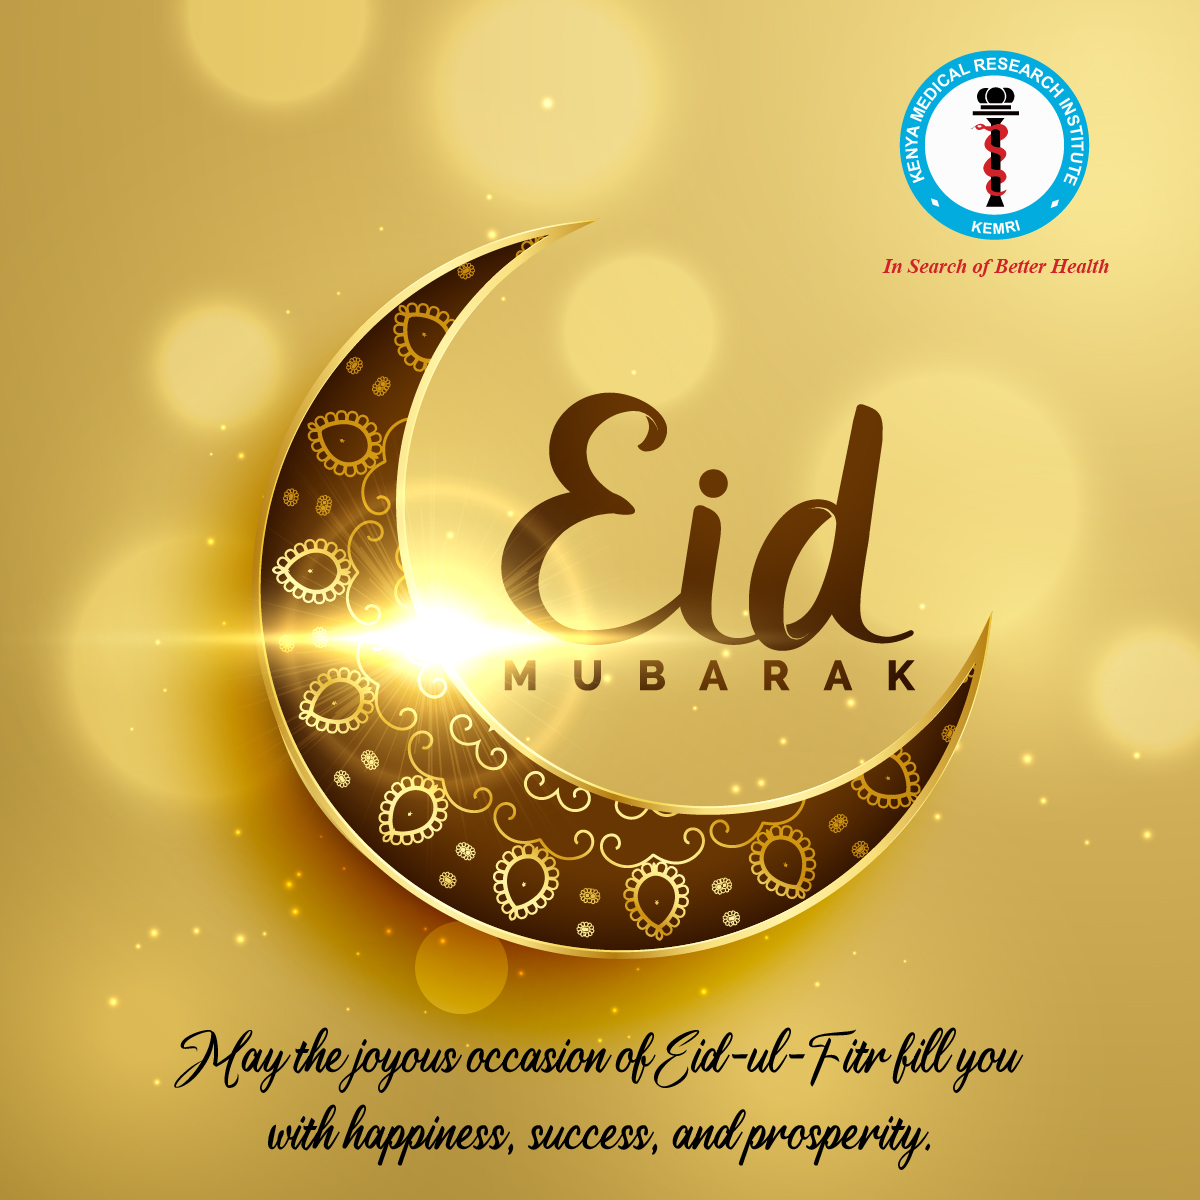 Eid Mubarak to all our Muslim Brothers and Sisters, on this blessed occasion of Eid ul-Fitr, we wish you and your loved ones good health, abundant joy, peace, and prosperity. #ramadanmubarak #Ramadan